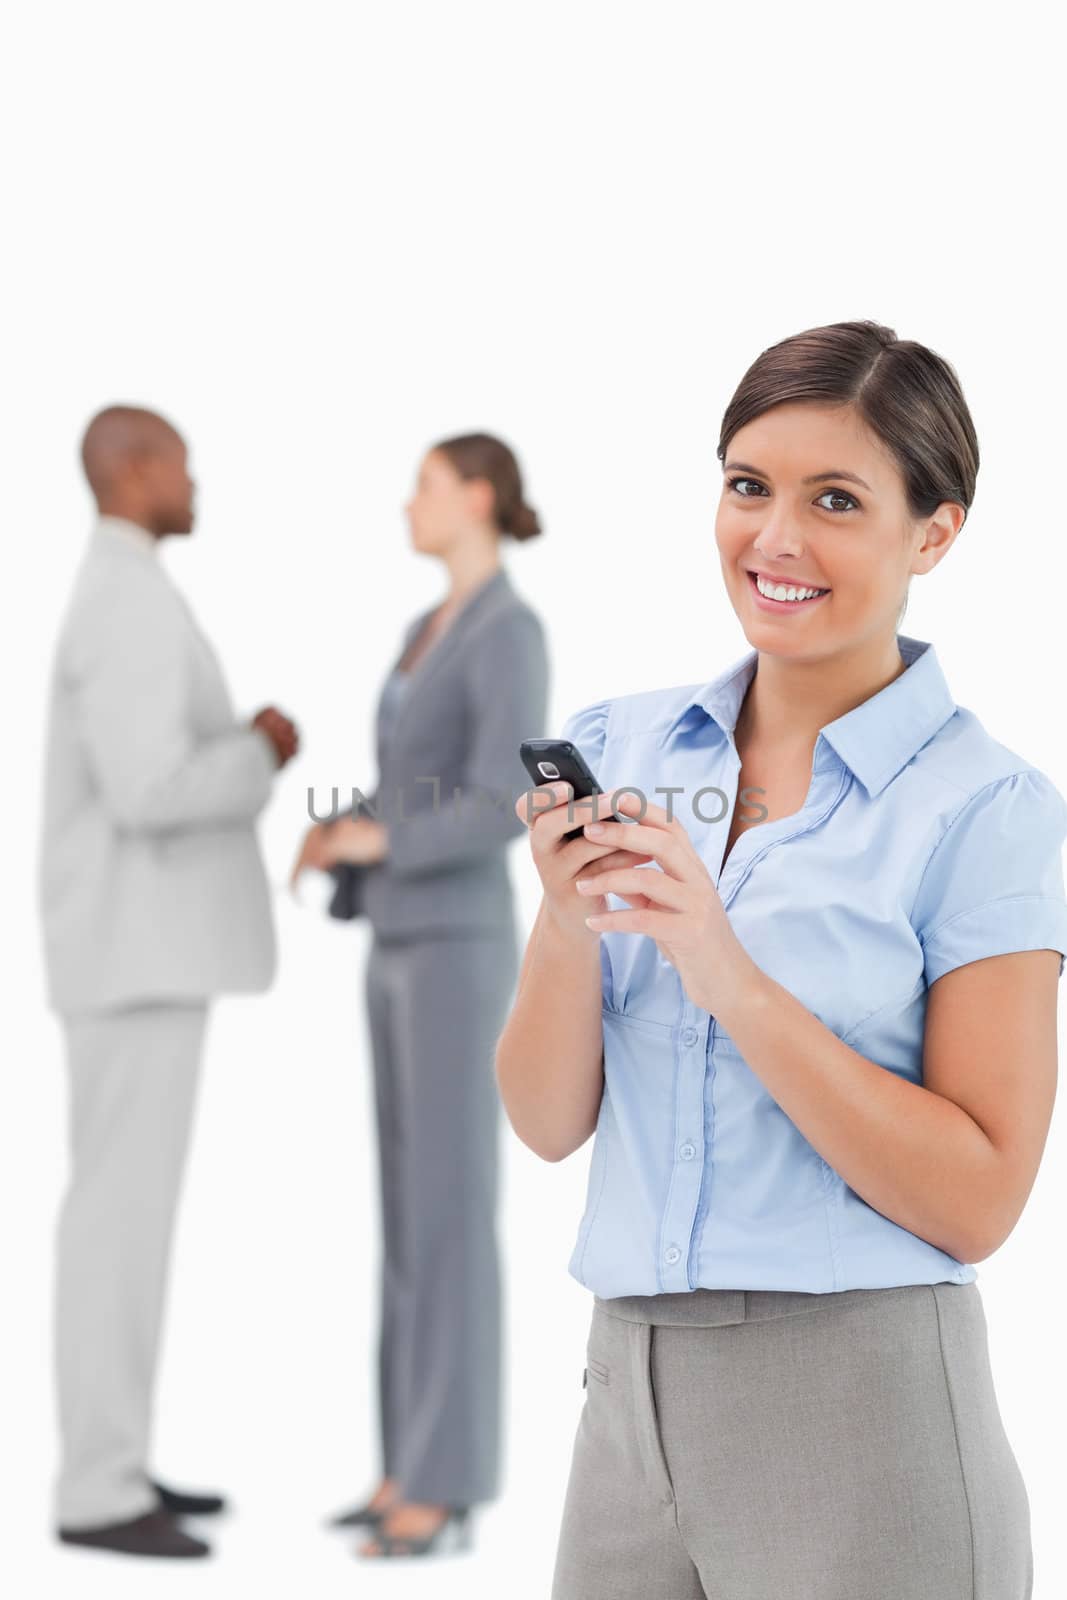 Smiling tradeswoman with cellphone and associates behind her by Wavebreakmedia